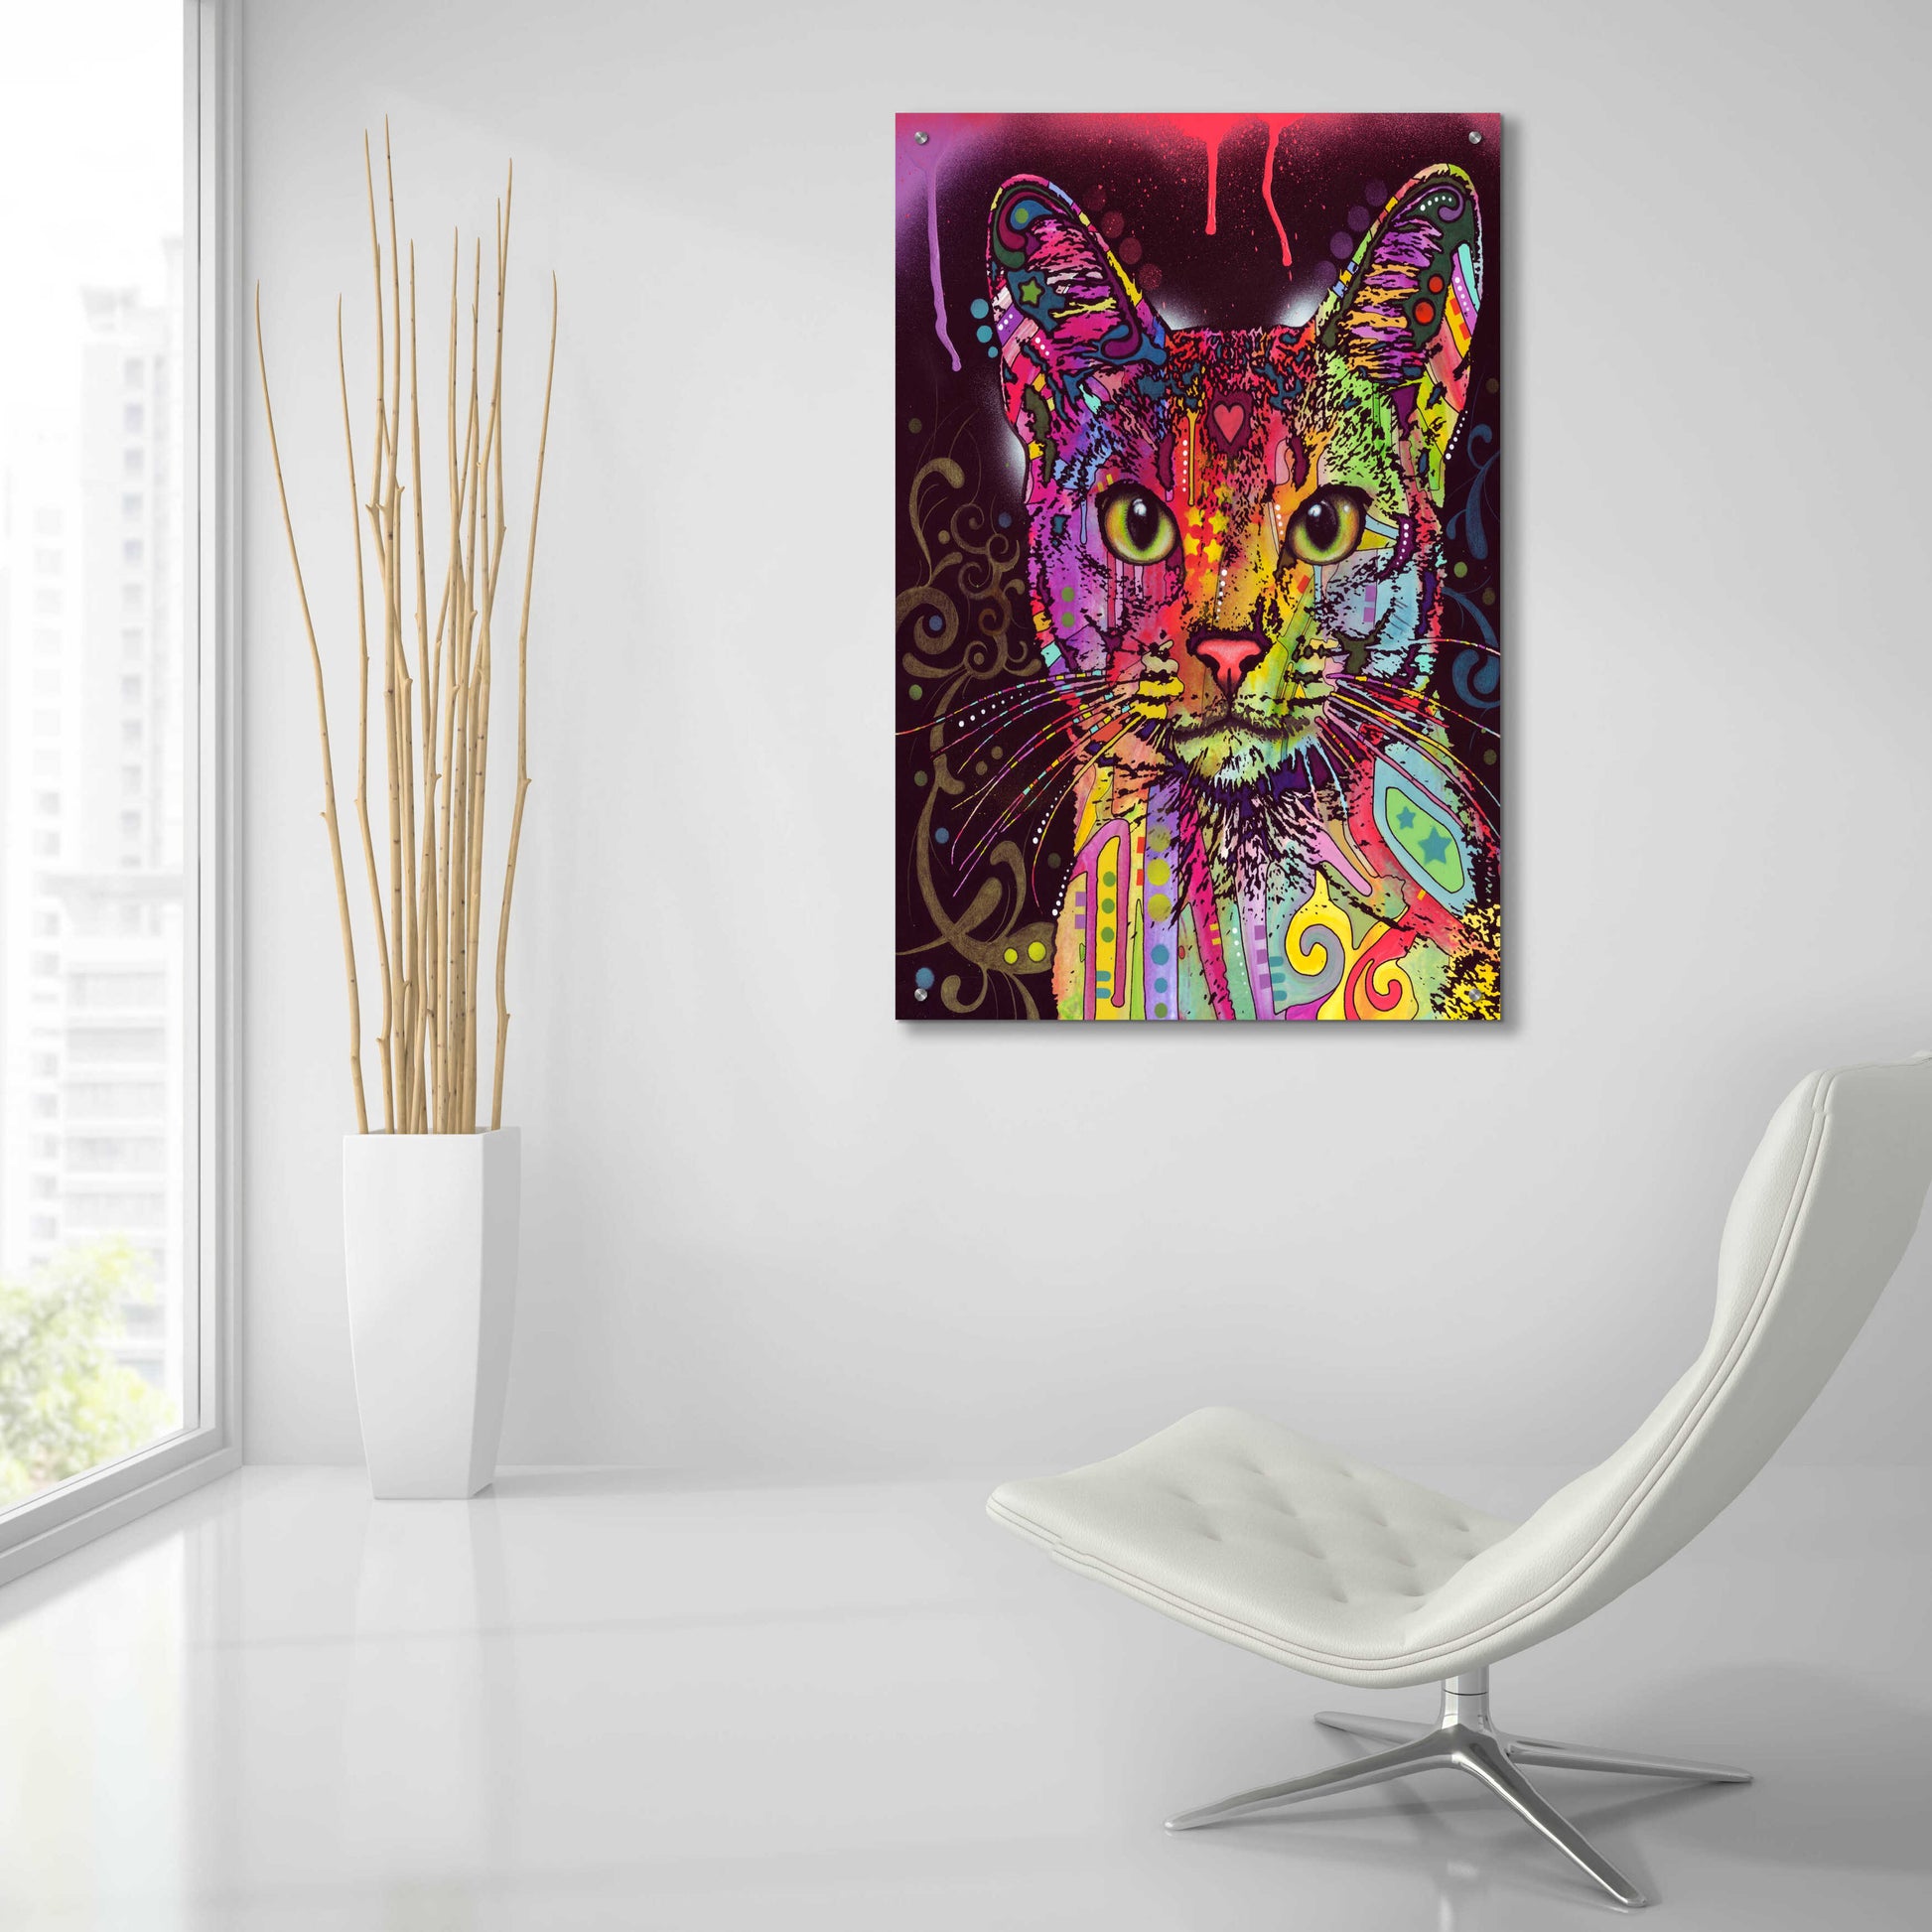 Epic Art 'Abyssinian' by Dean Russo, Acrylic Glass Wall Art,24x36